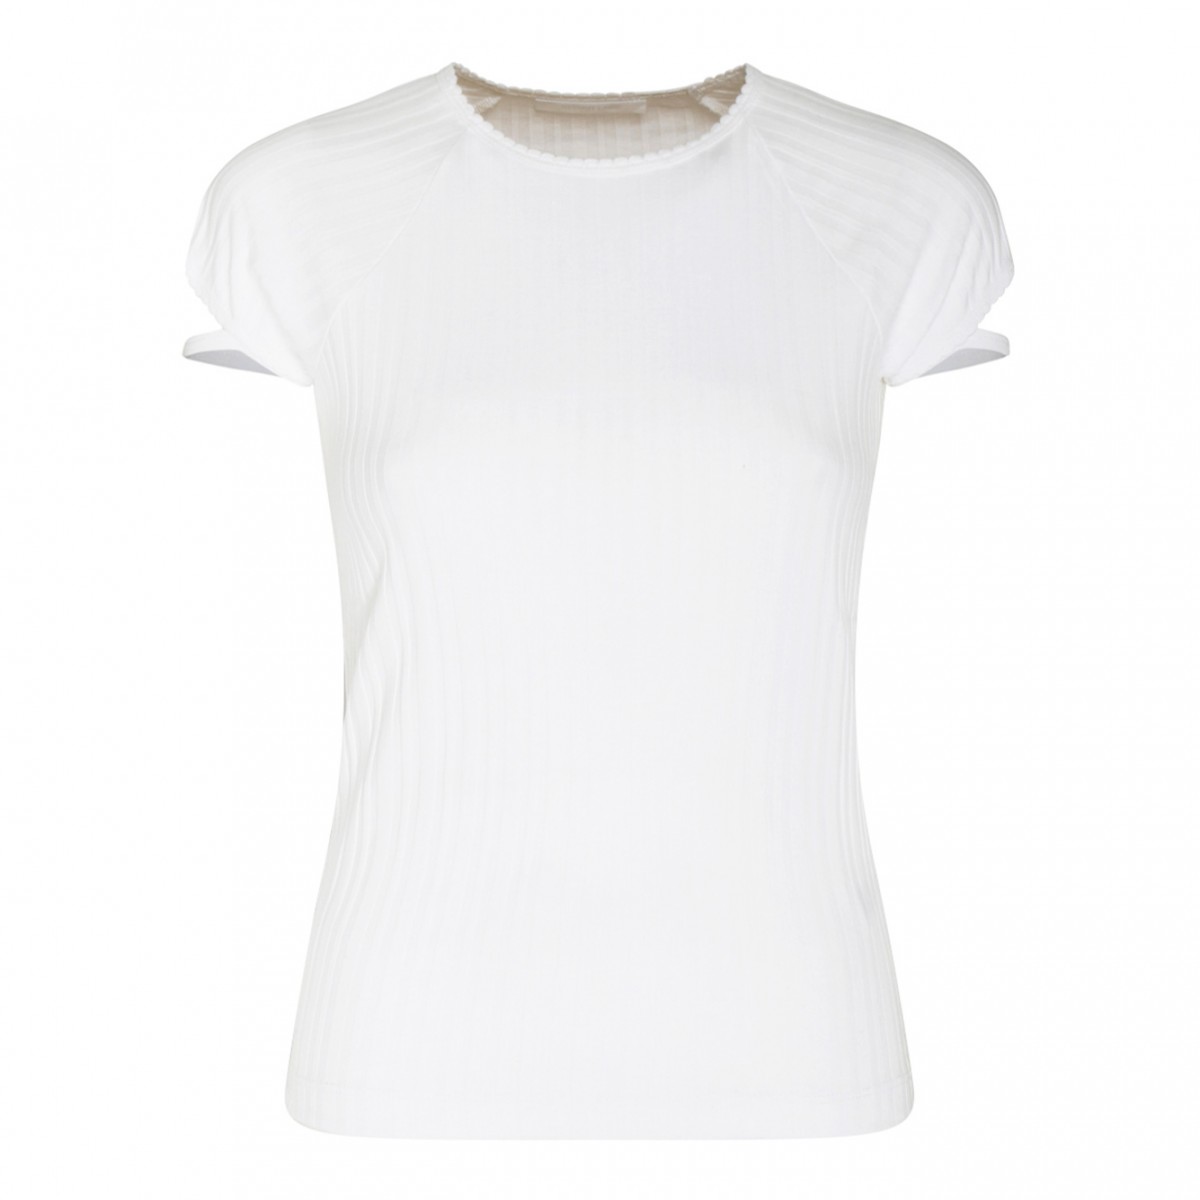 Helmut Lang White Cotton Ribbed Cut Out T-Shirt.